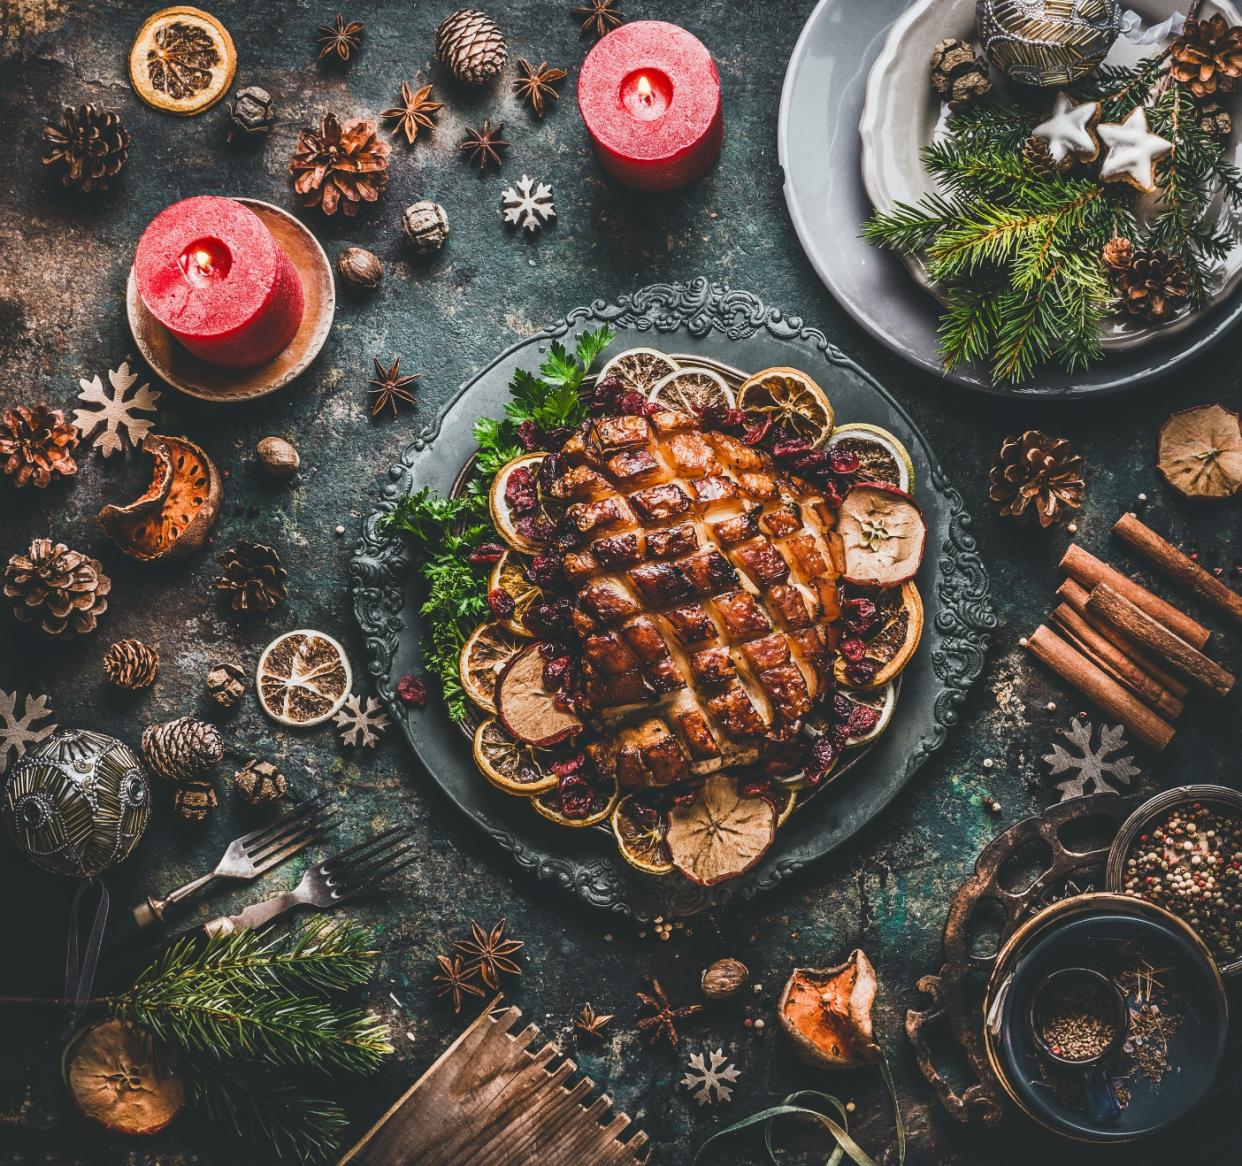 A top view of roasted turkey served on top of dried lemon and garnishing with pine cones, red candles and dried spices as Christmas decorations on a table.